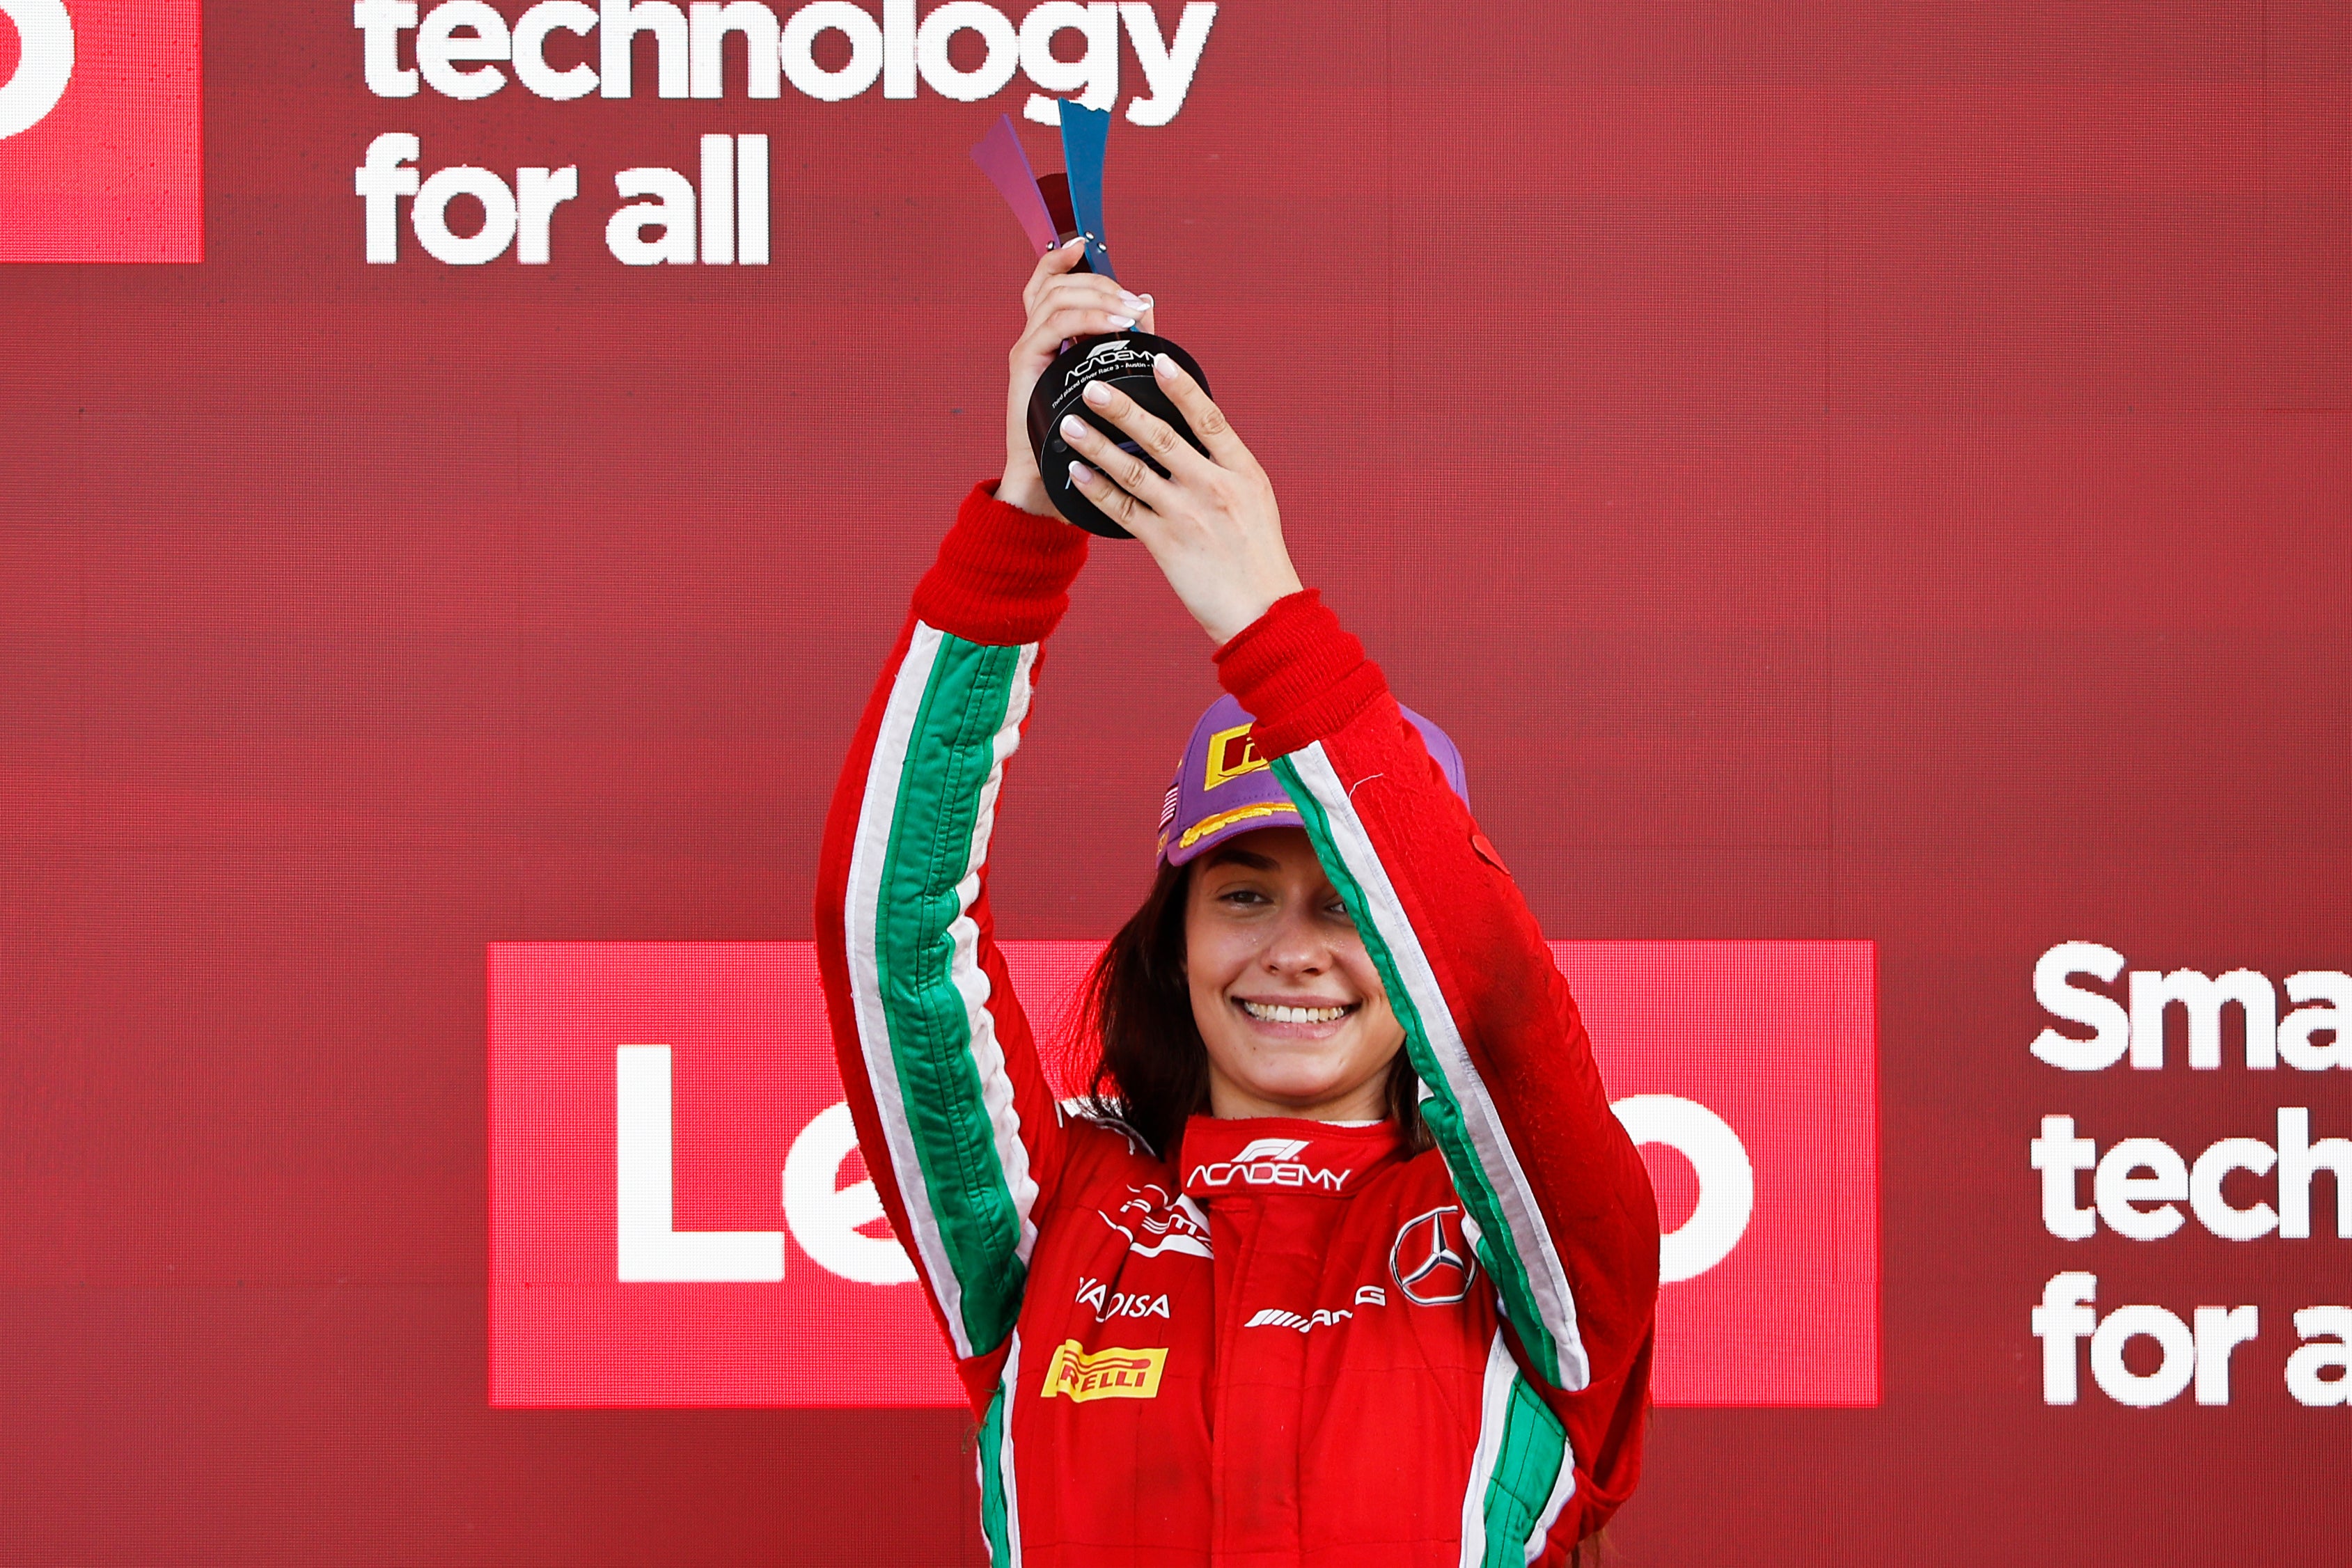 Marta Garcia secured overall victory in the inaugural F1 Academy season